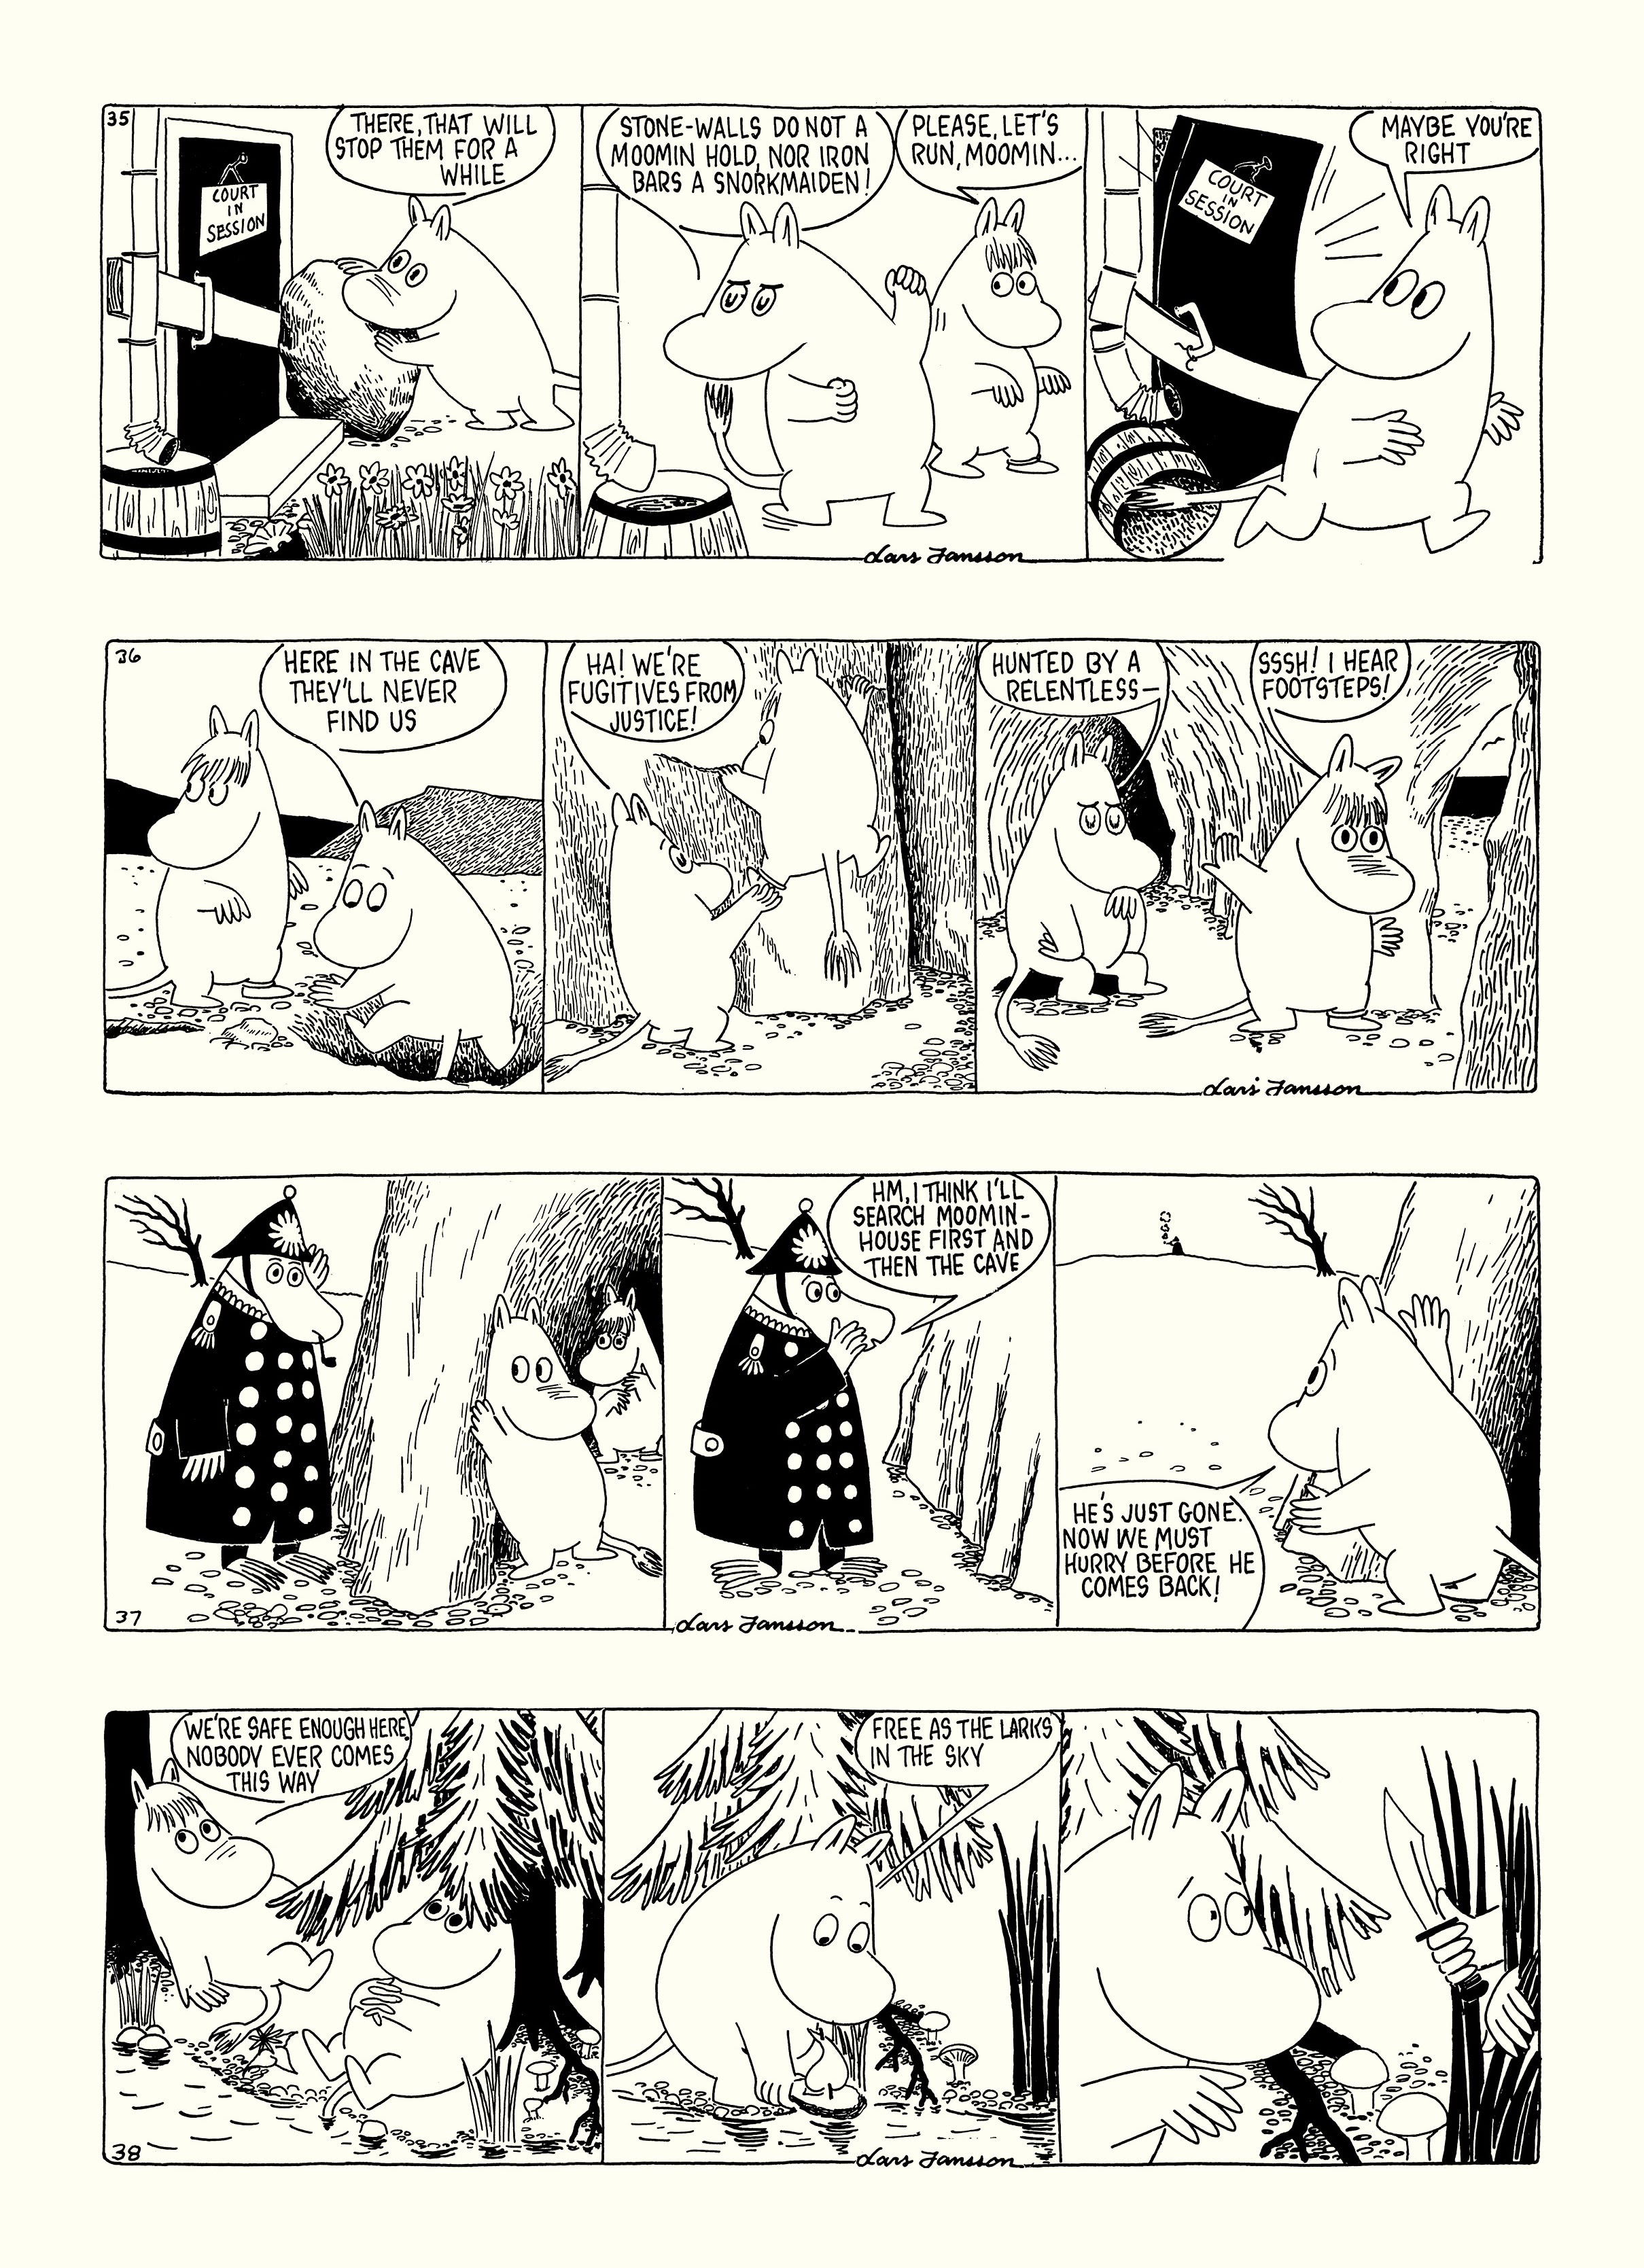 Read online Moomin: The Complete Lars Jansson Comic Strip comic -  Issue # TPB 6 - 15